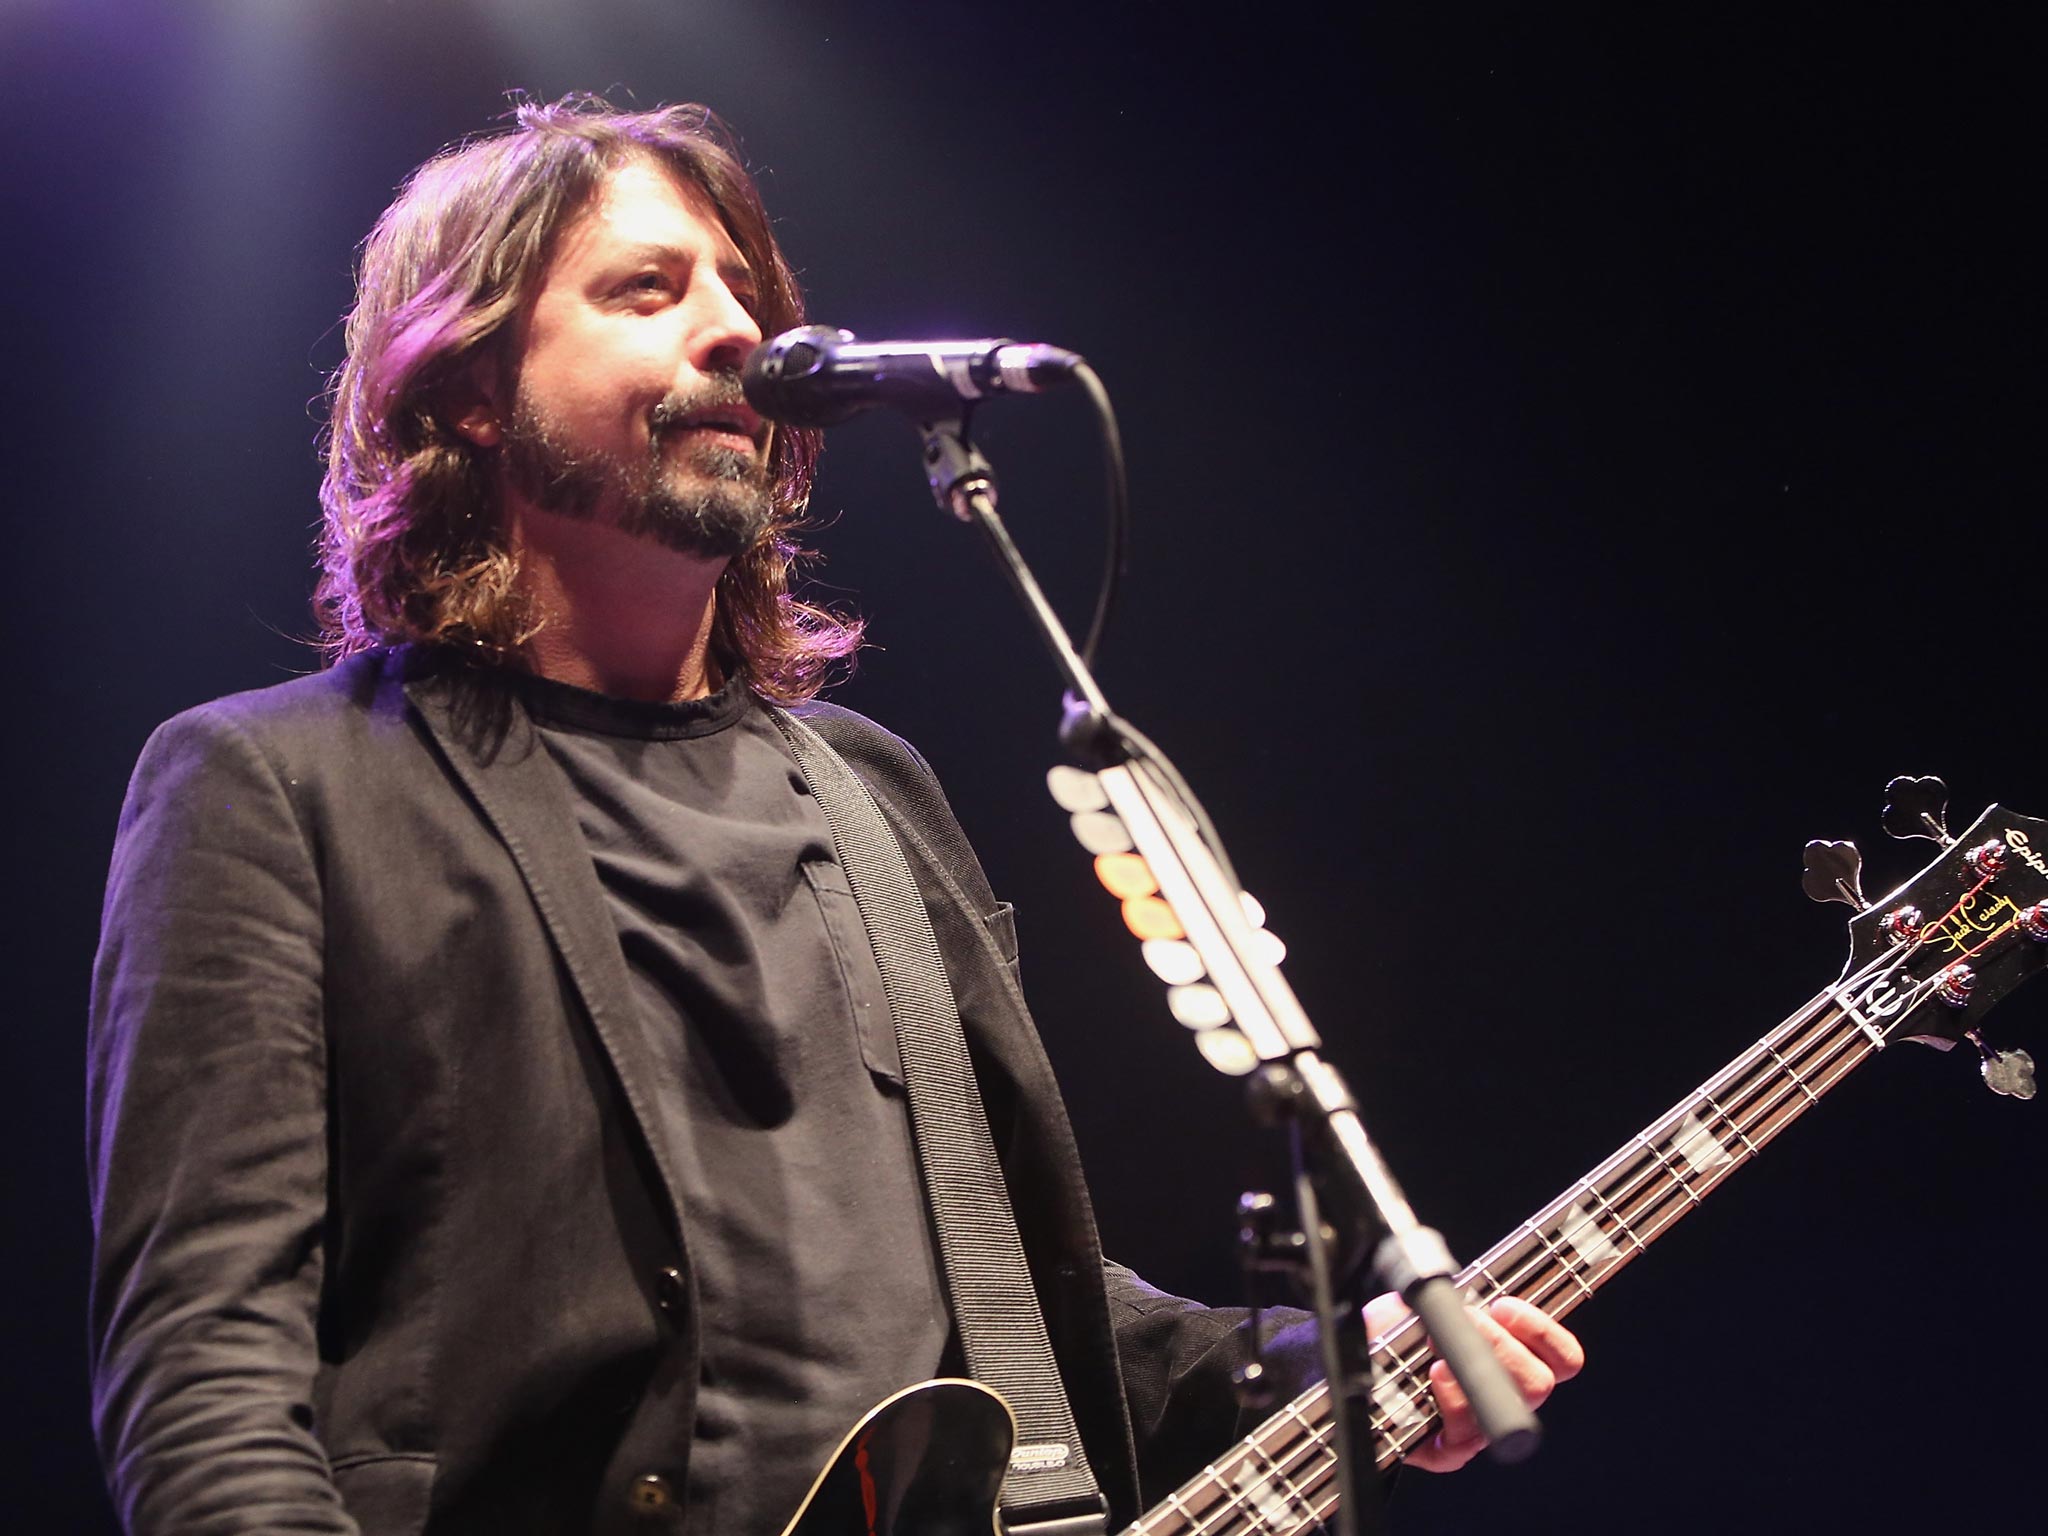 Foo Fighters frontman Dave Grohl will be directing the HBO mini series that will chronicle the recording of the band's new album